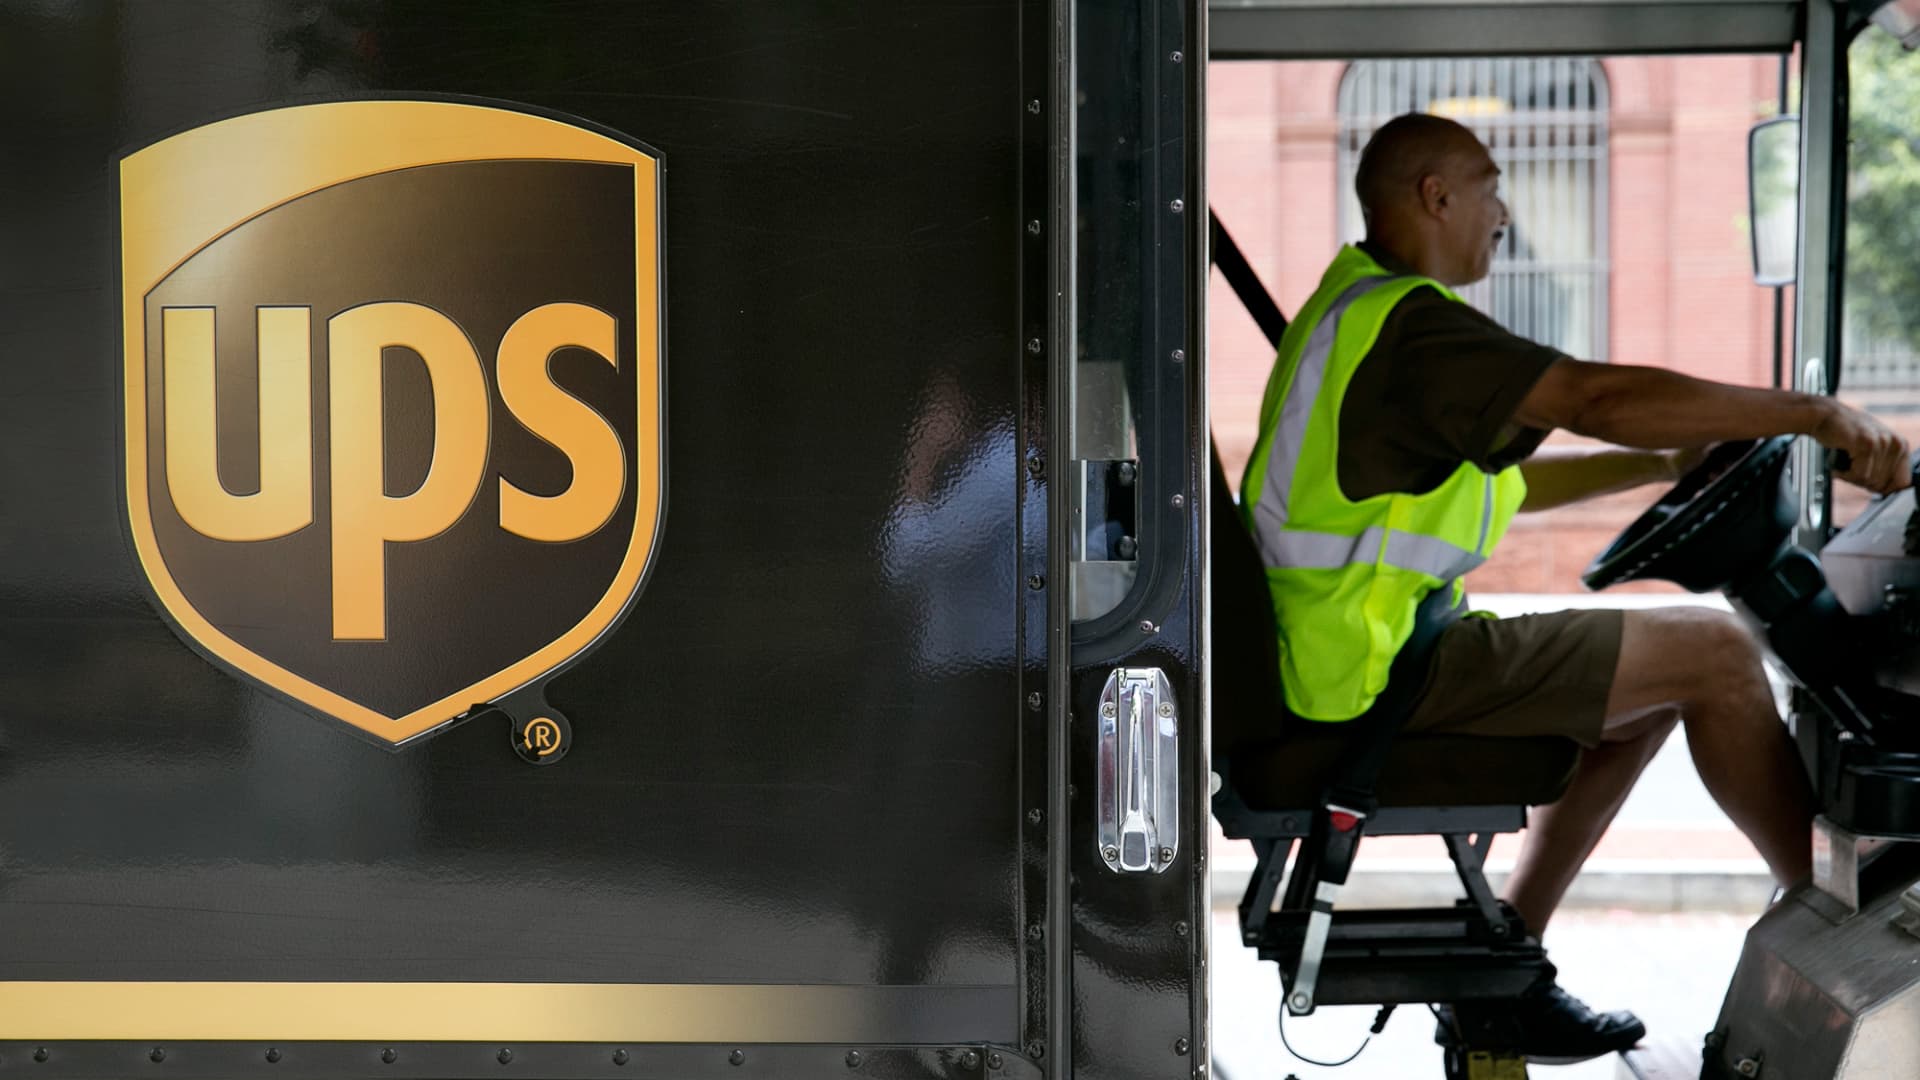 UPS drivers to average $170,000 in pay, benefits at end of 5-year deal